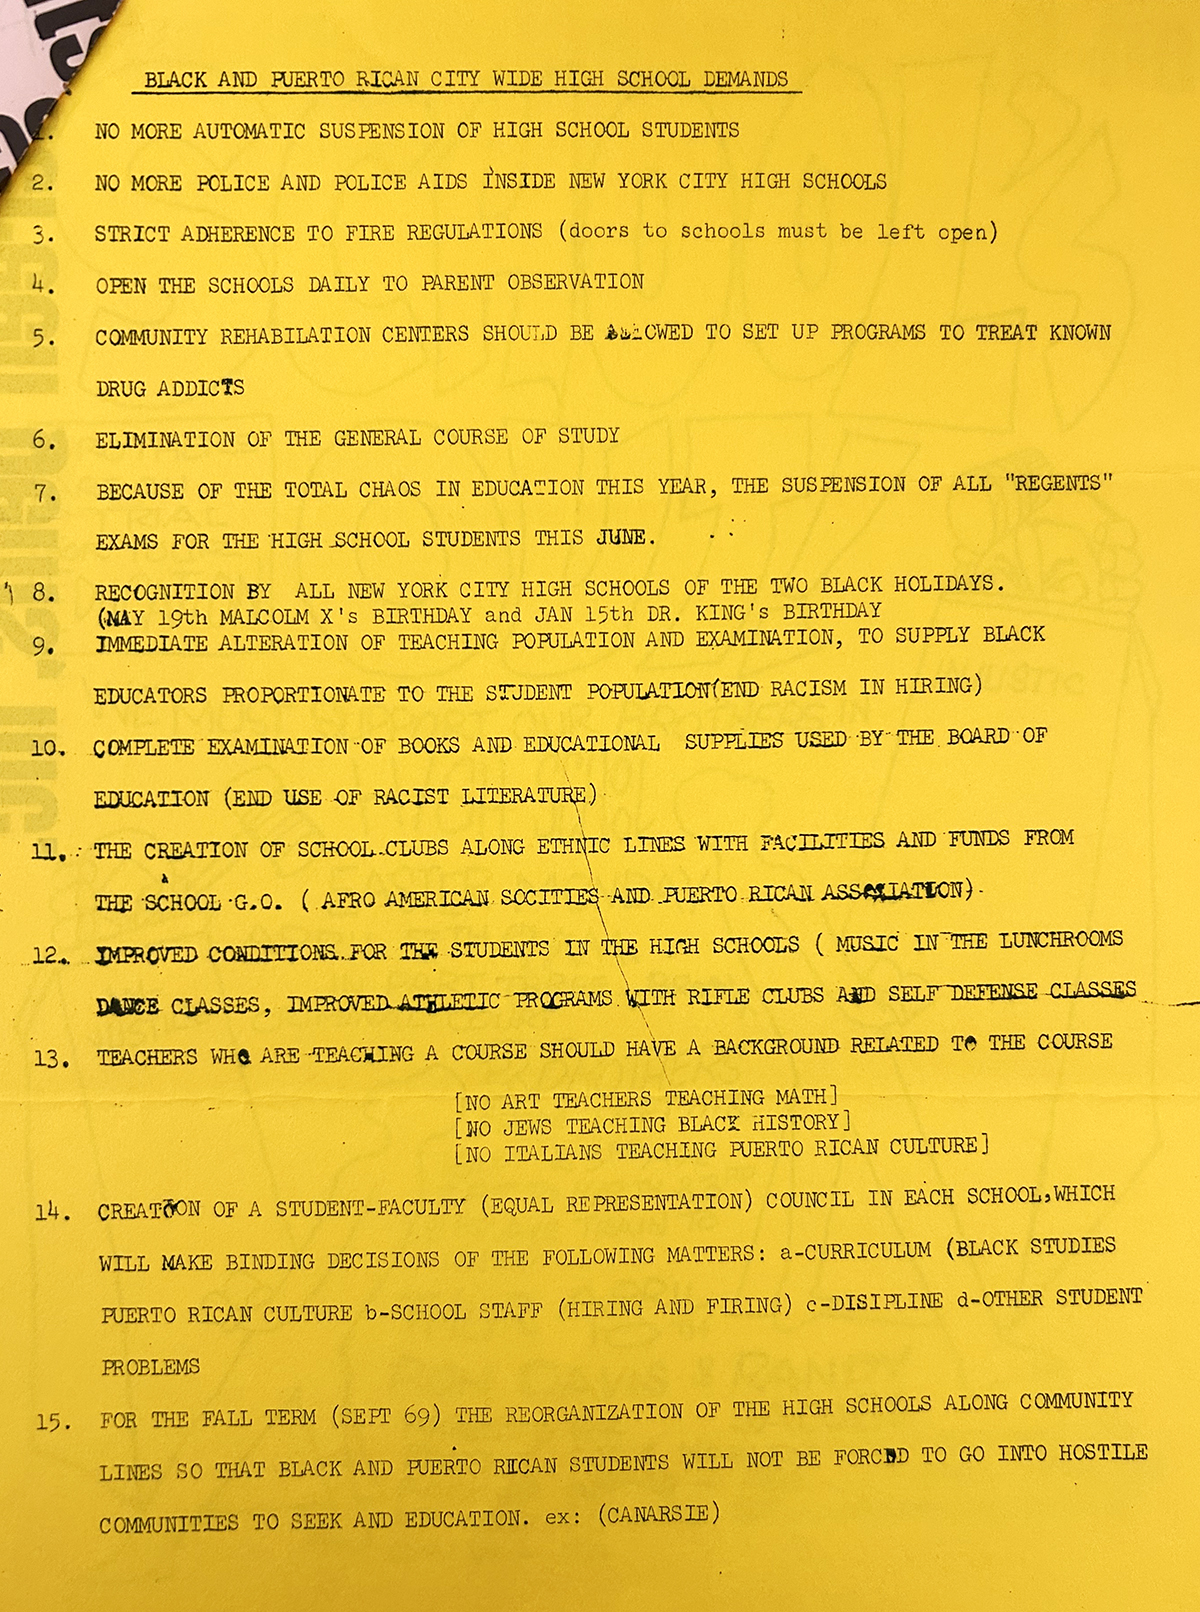 A typewritten list of demands of Black and Puerto Rican high-school students